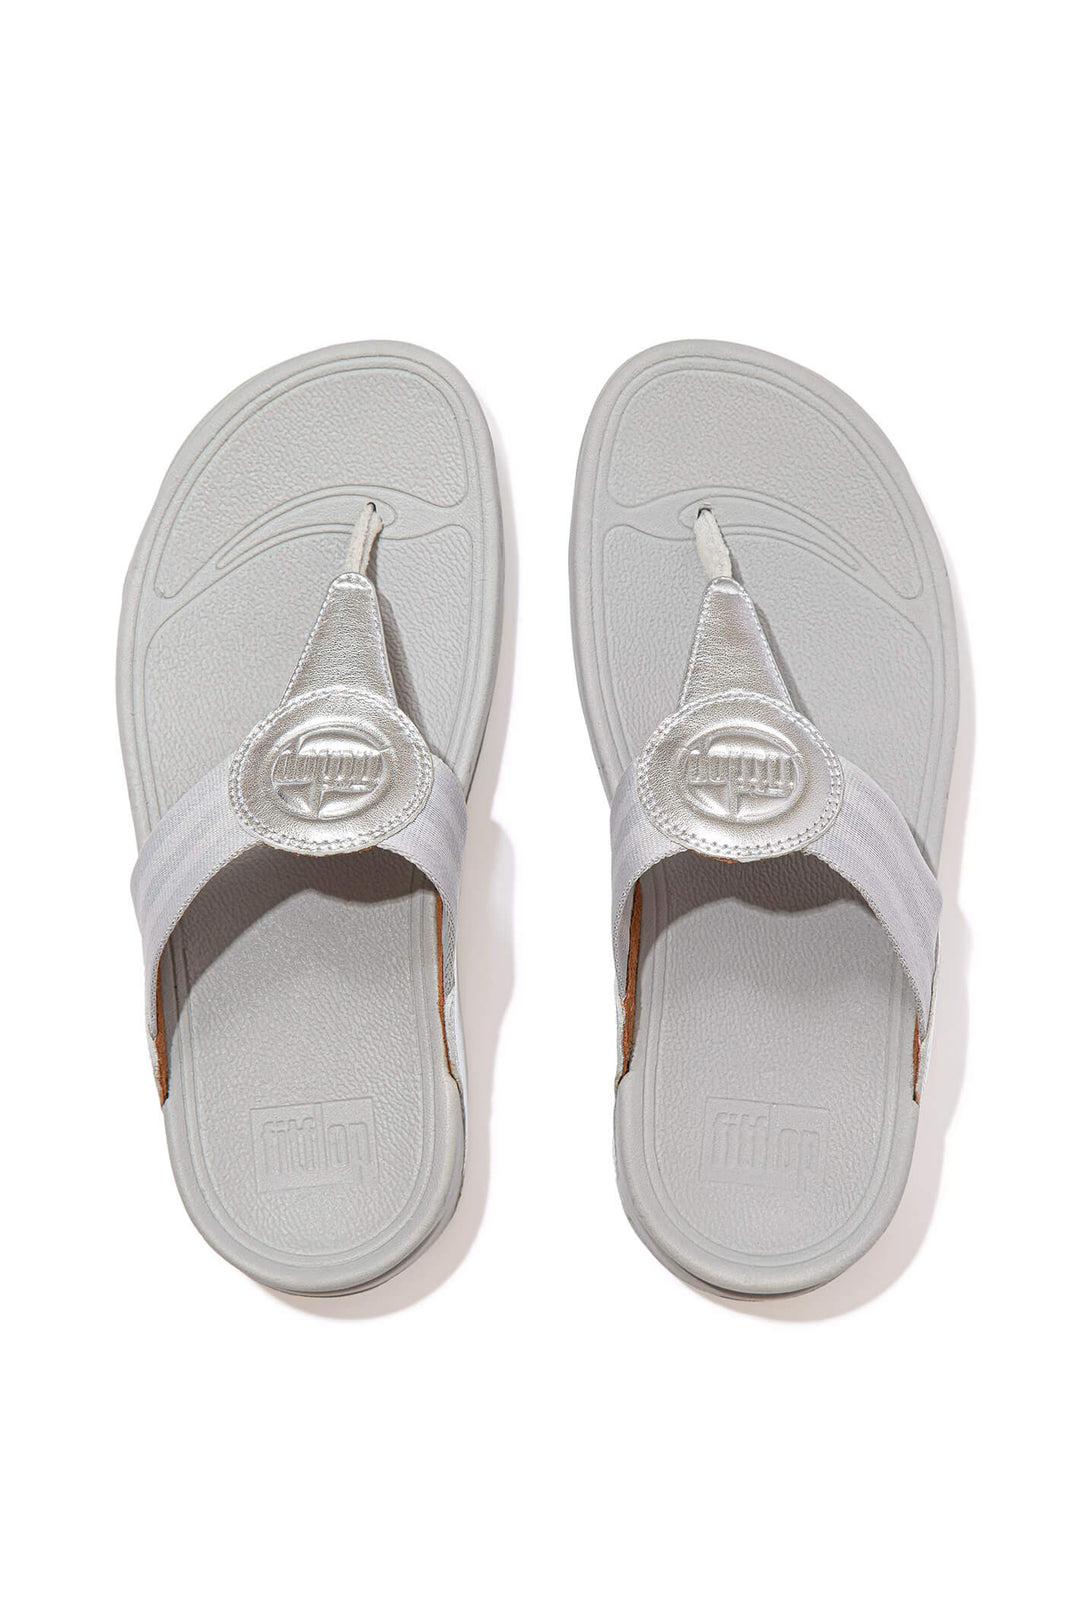 Fitflop Walkstar DX4-011 Toe-Post Silver Sandal - Shirley Allum Boutique